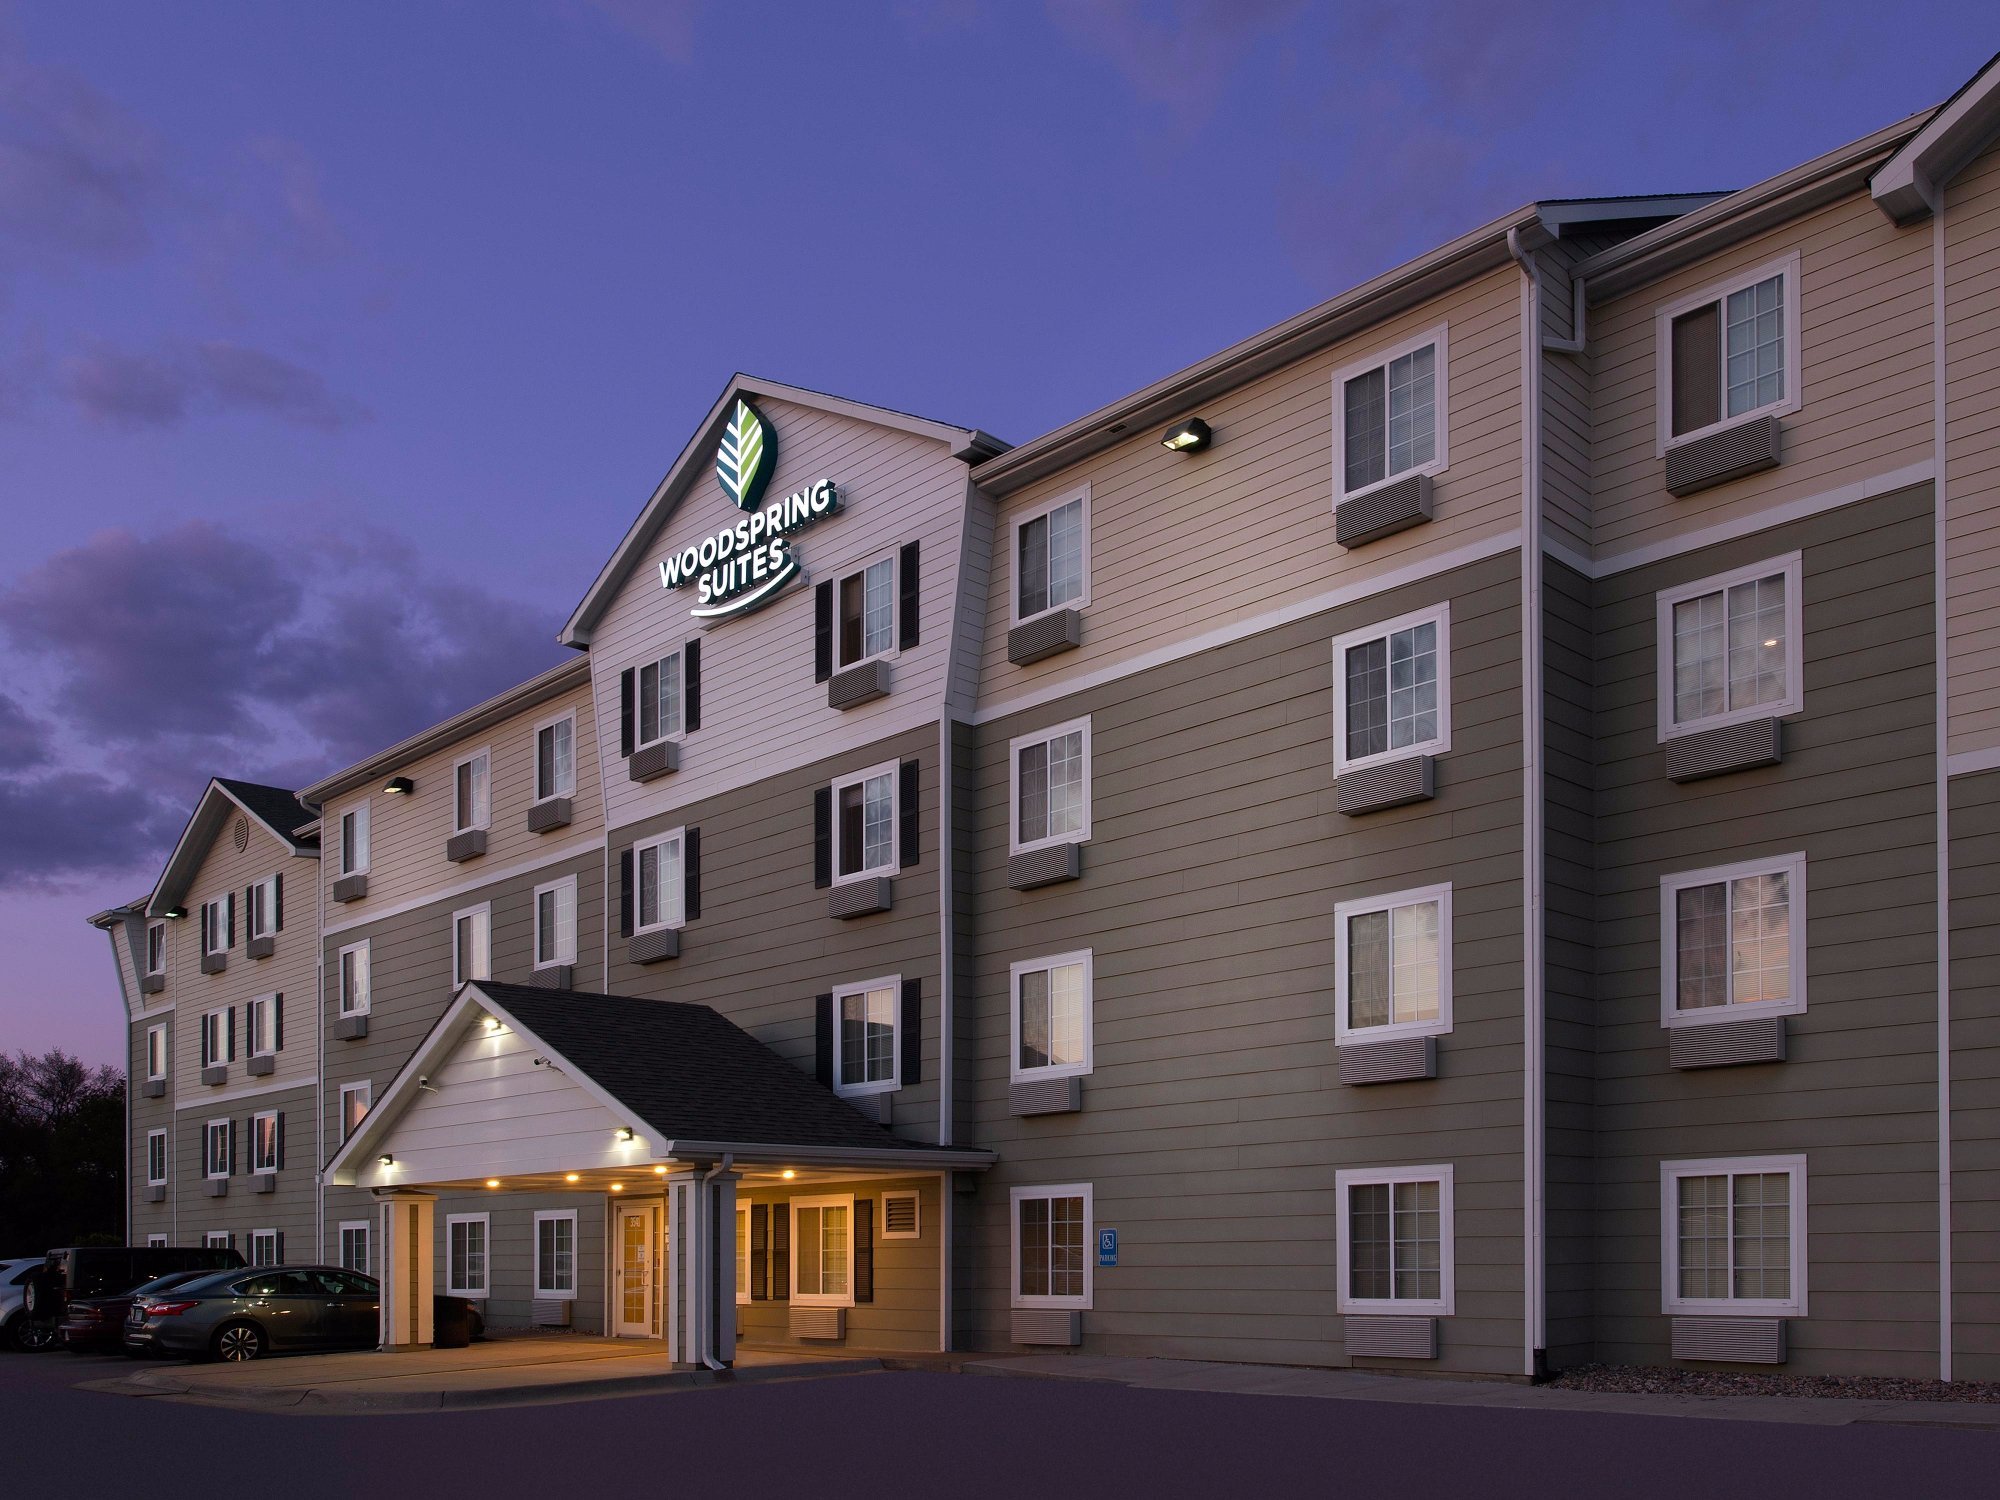 Photo of WoodSpring Suites Council Bluffs, Council Bluffs, IA